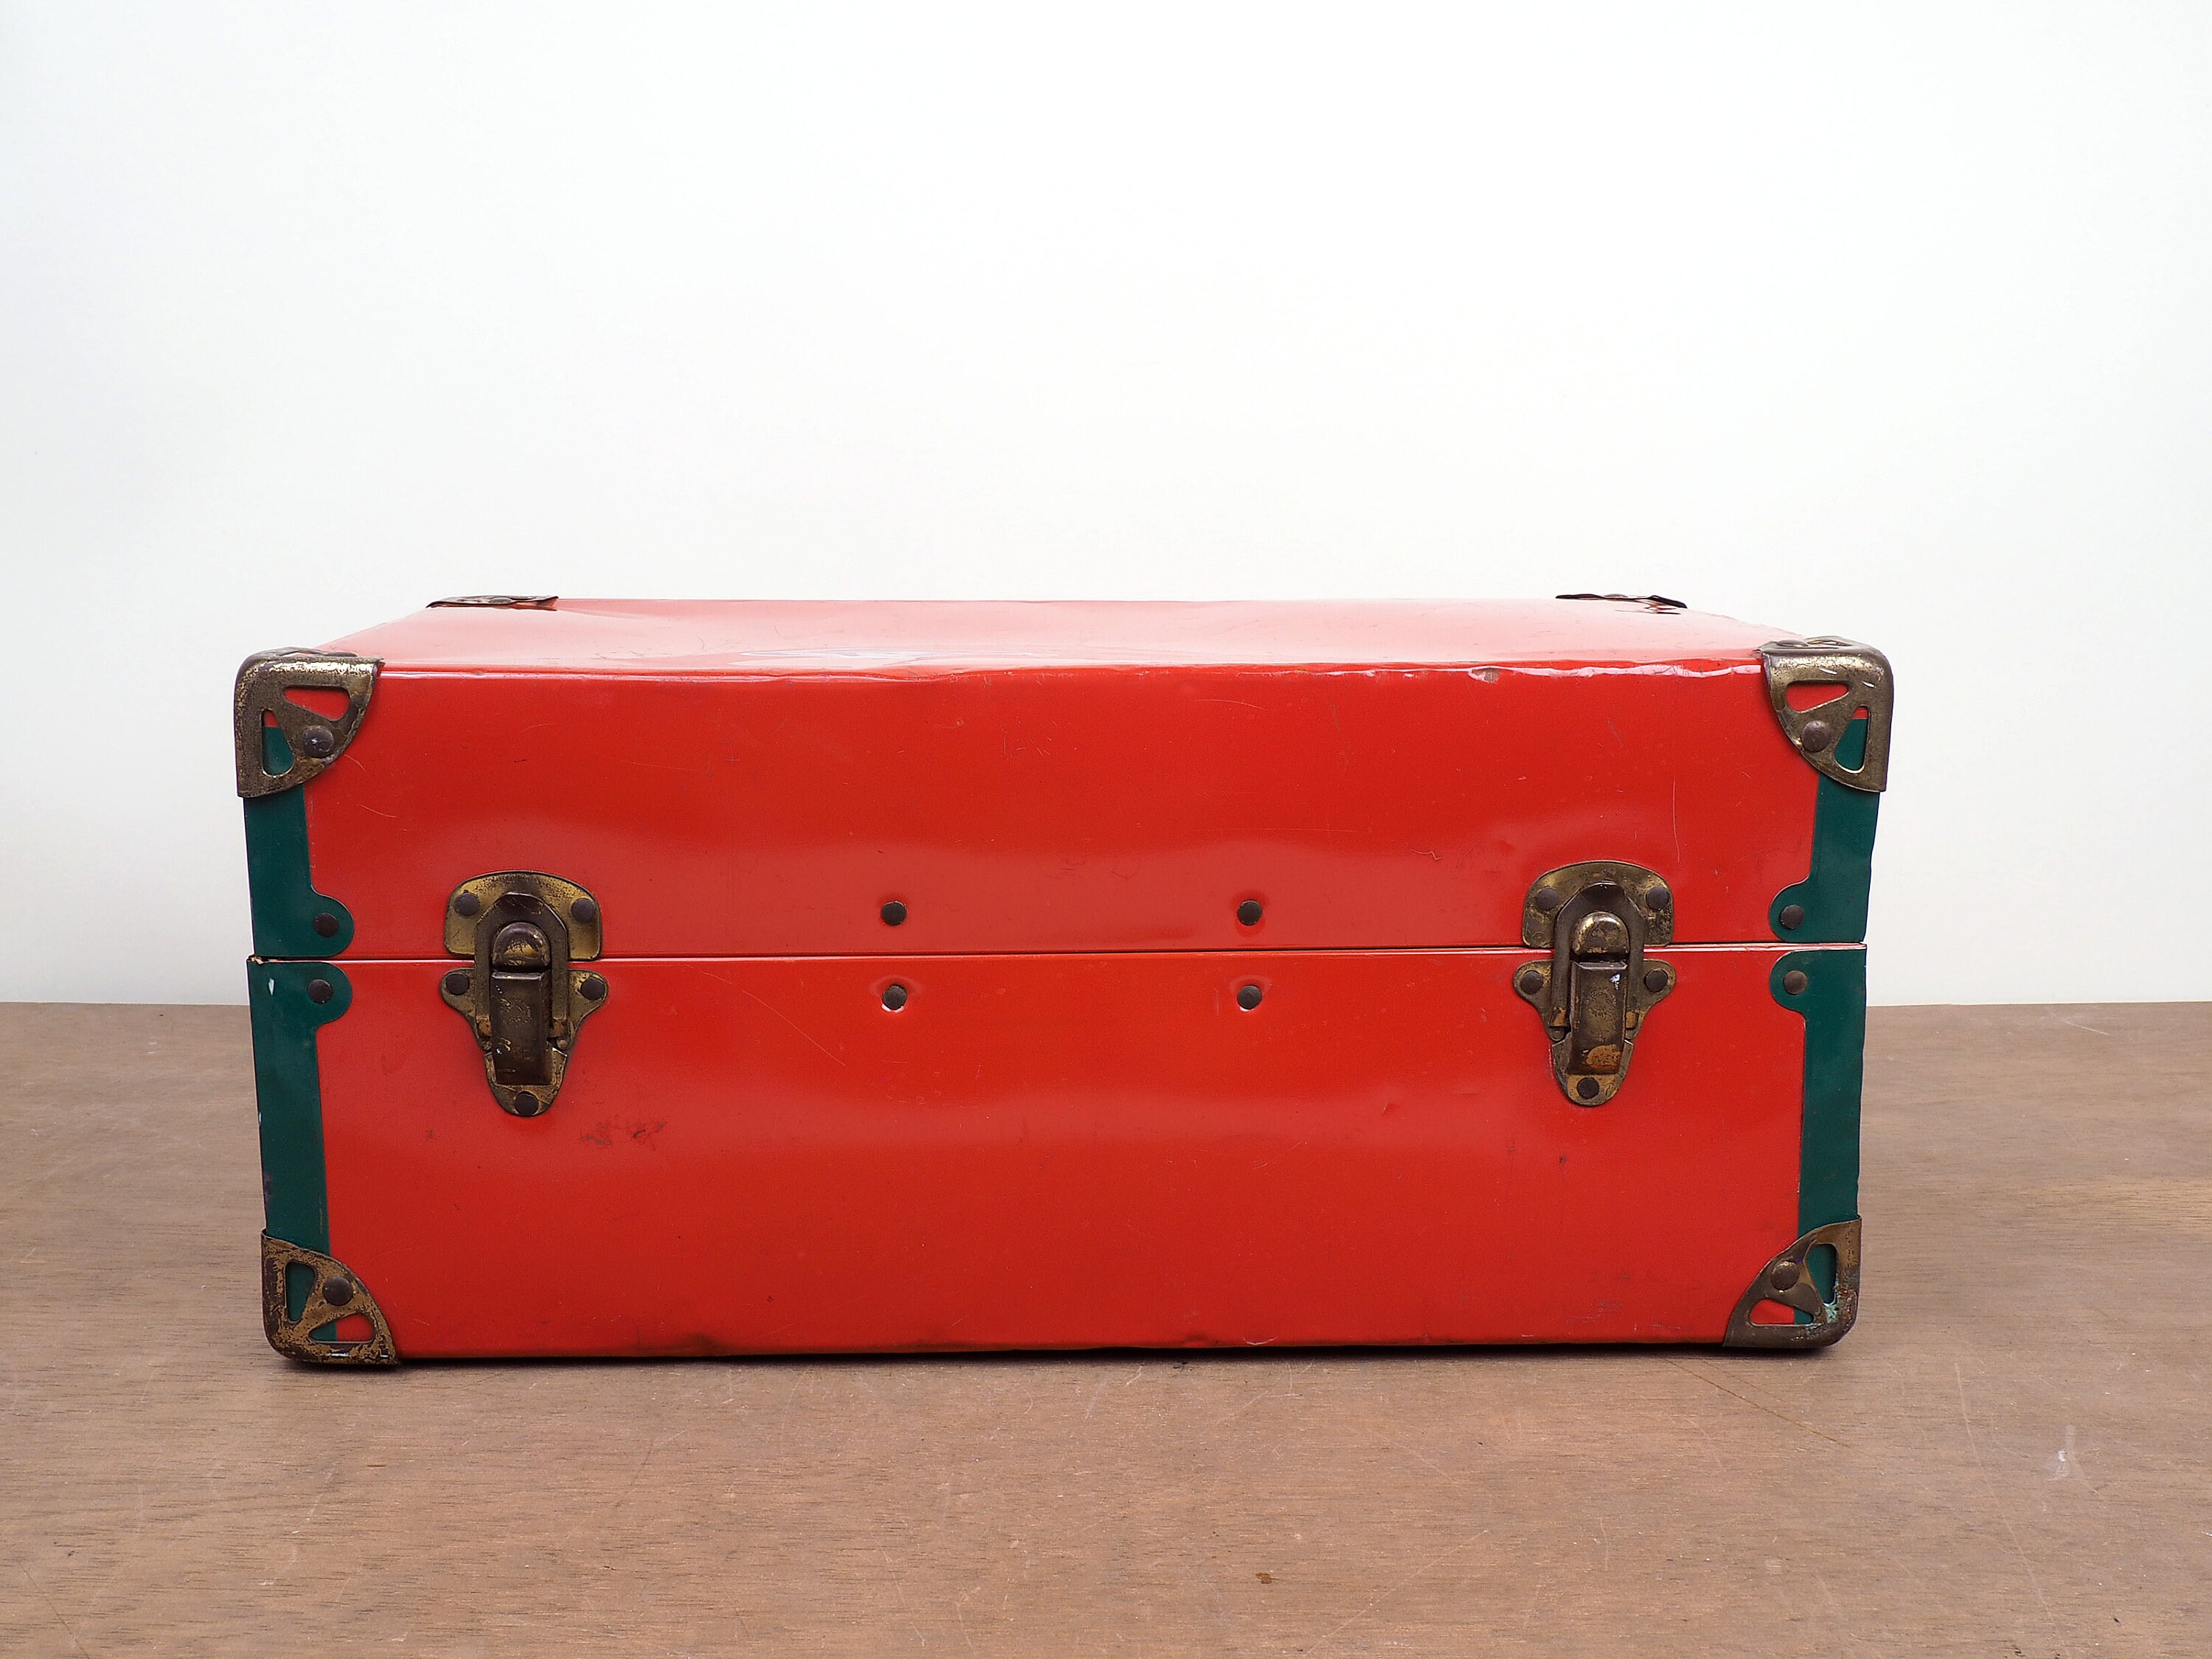 Old, green, vintage retro suitcase with leather handle and metal